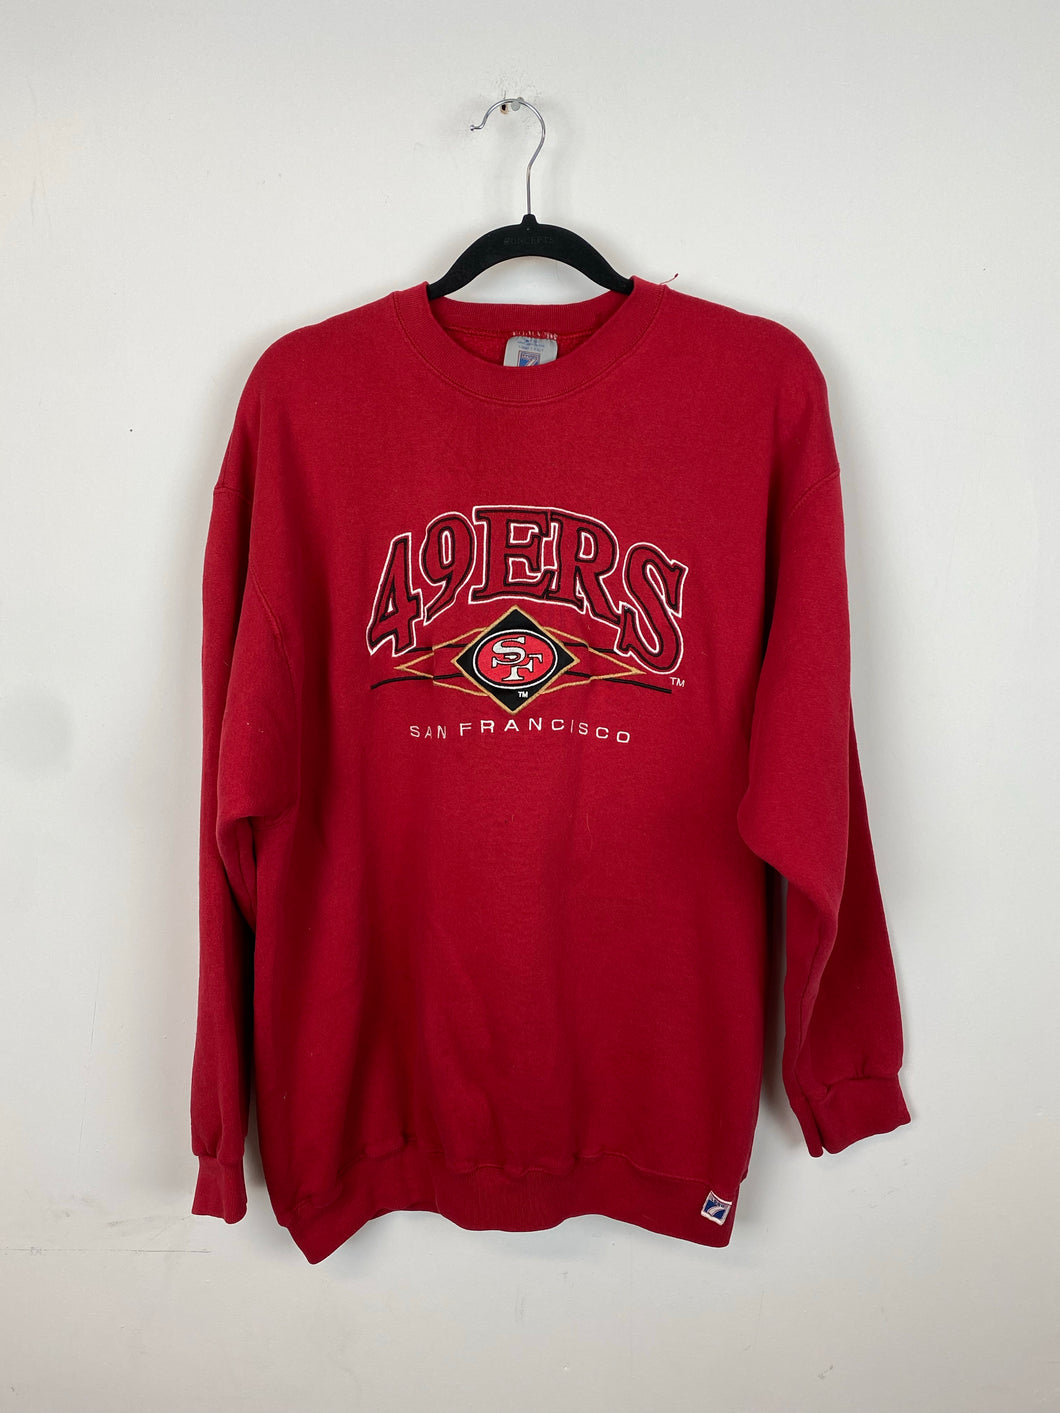 90s Embroidered 49ers crewneck - M/L